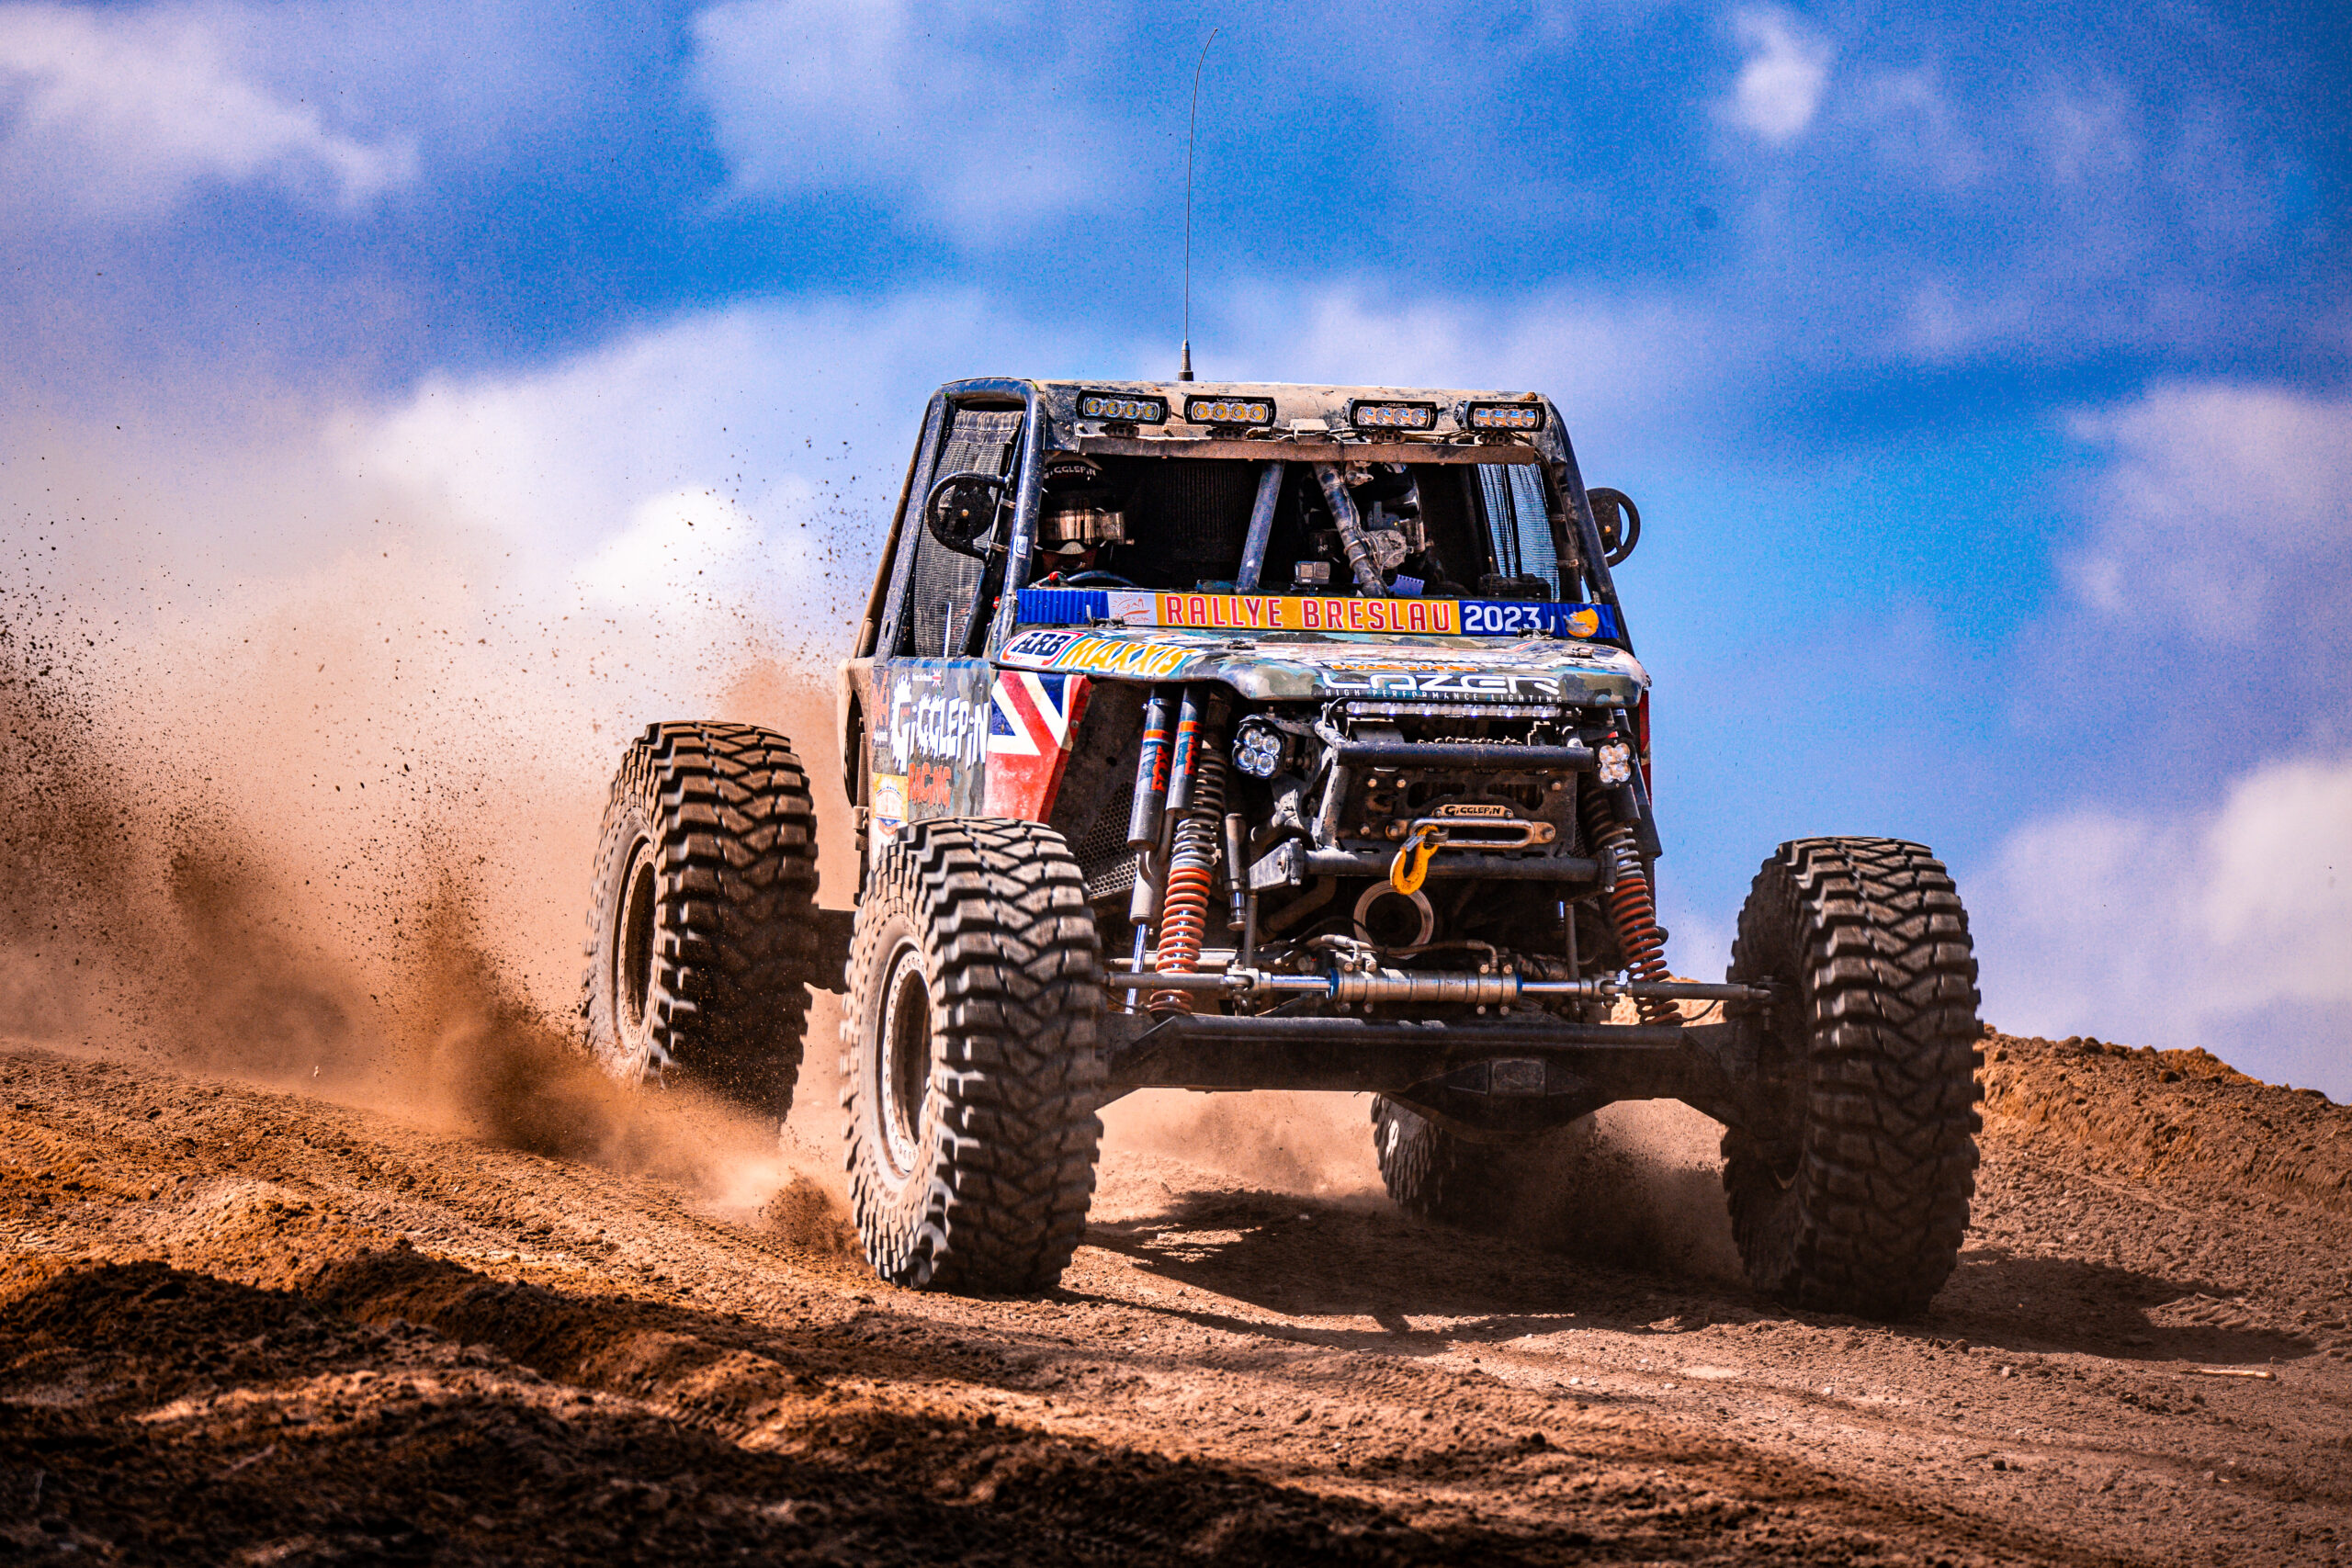 EBC-Equipped Gigglepin Racing Team Claims 2023 Ultra 4 Off-Road Championship